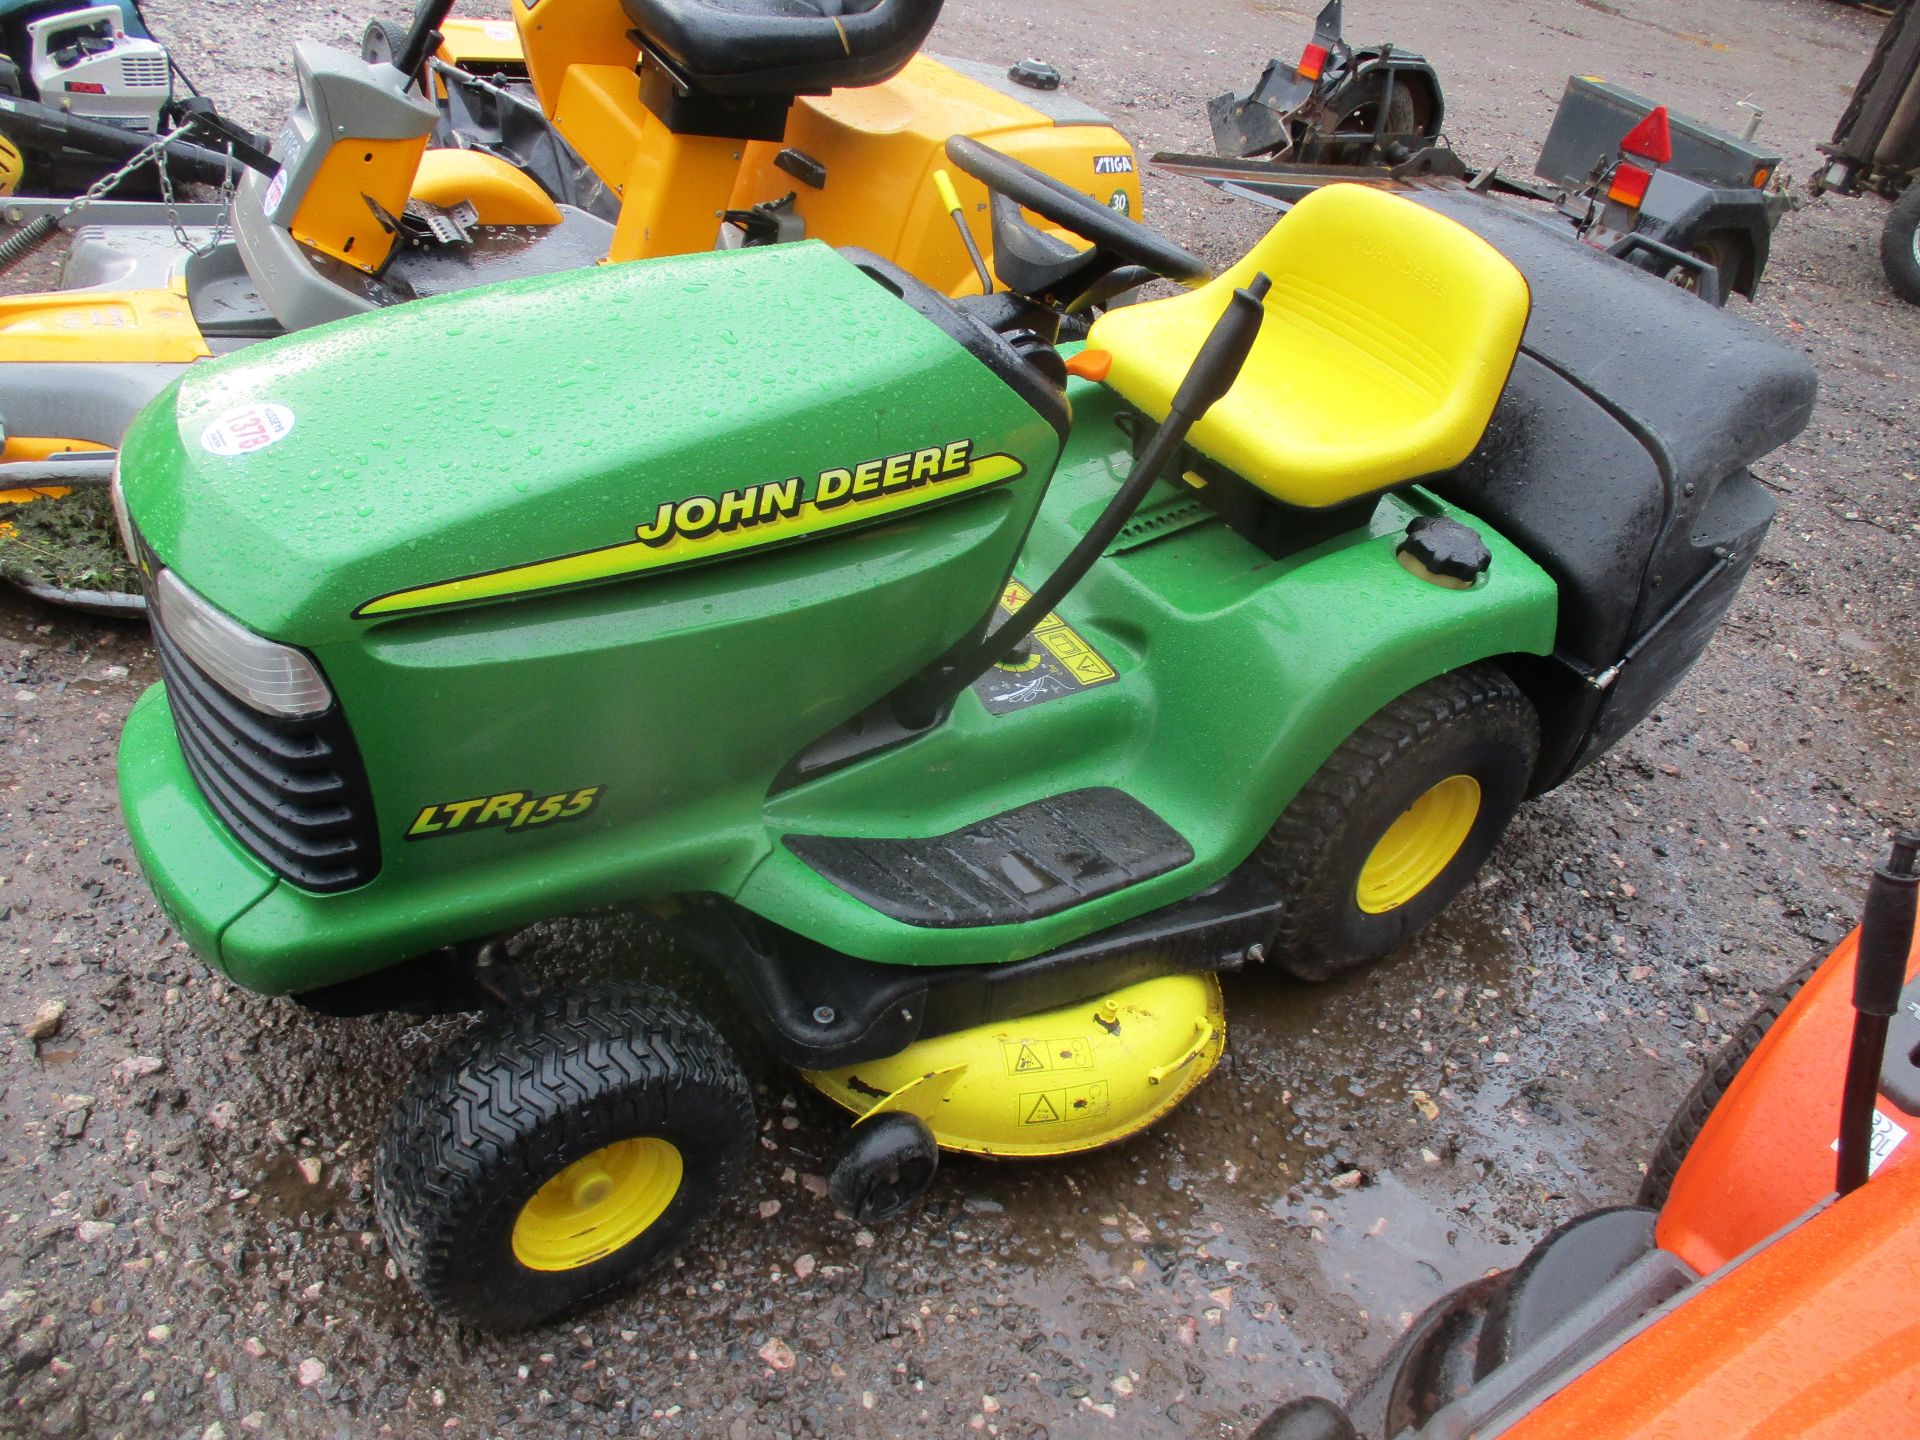 JOHN DEERE LTR155 RIDE ON MOWER C.W COLLECTOR - Image 2 of 11